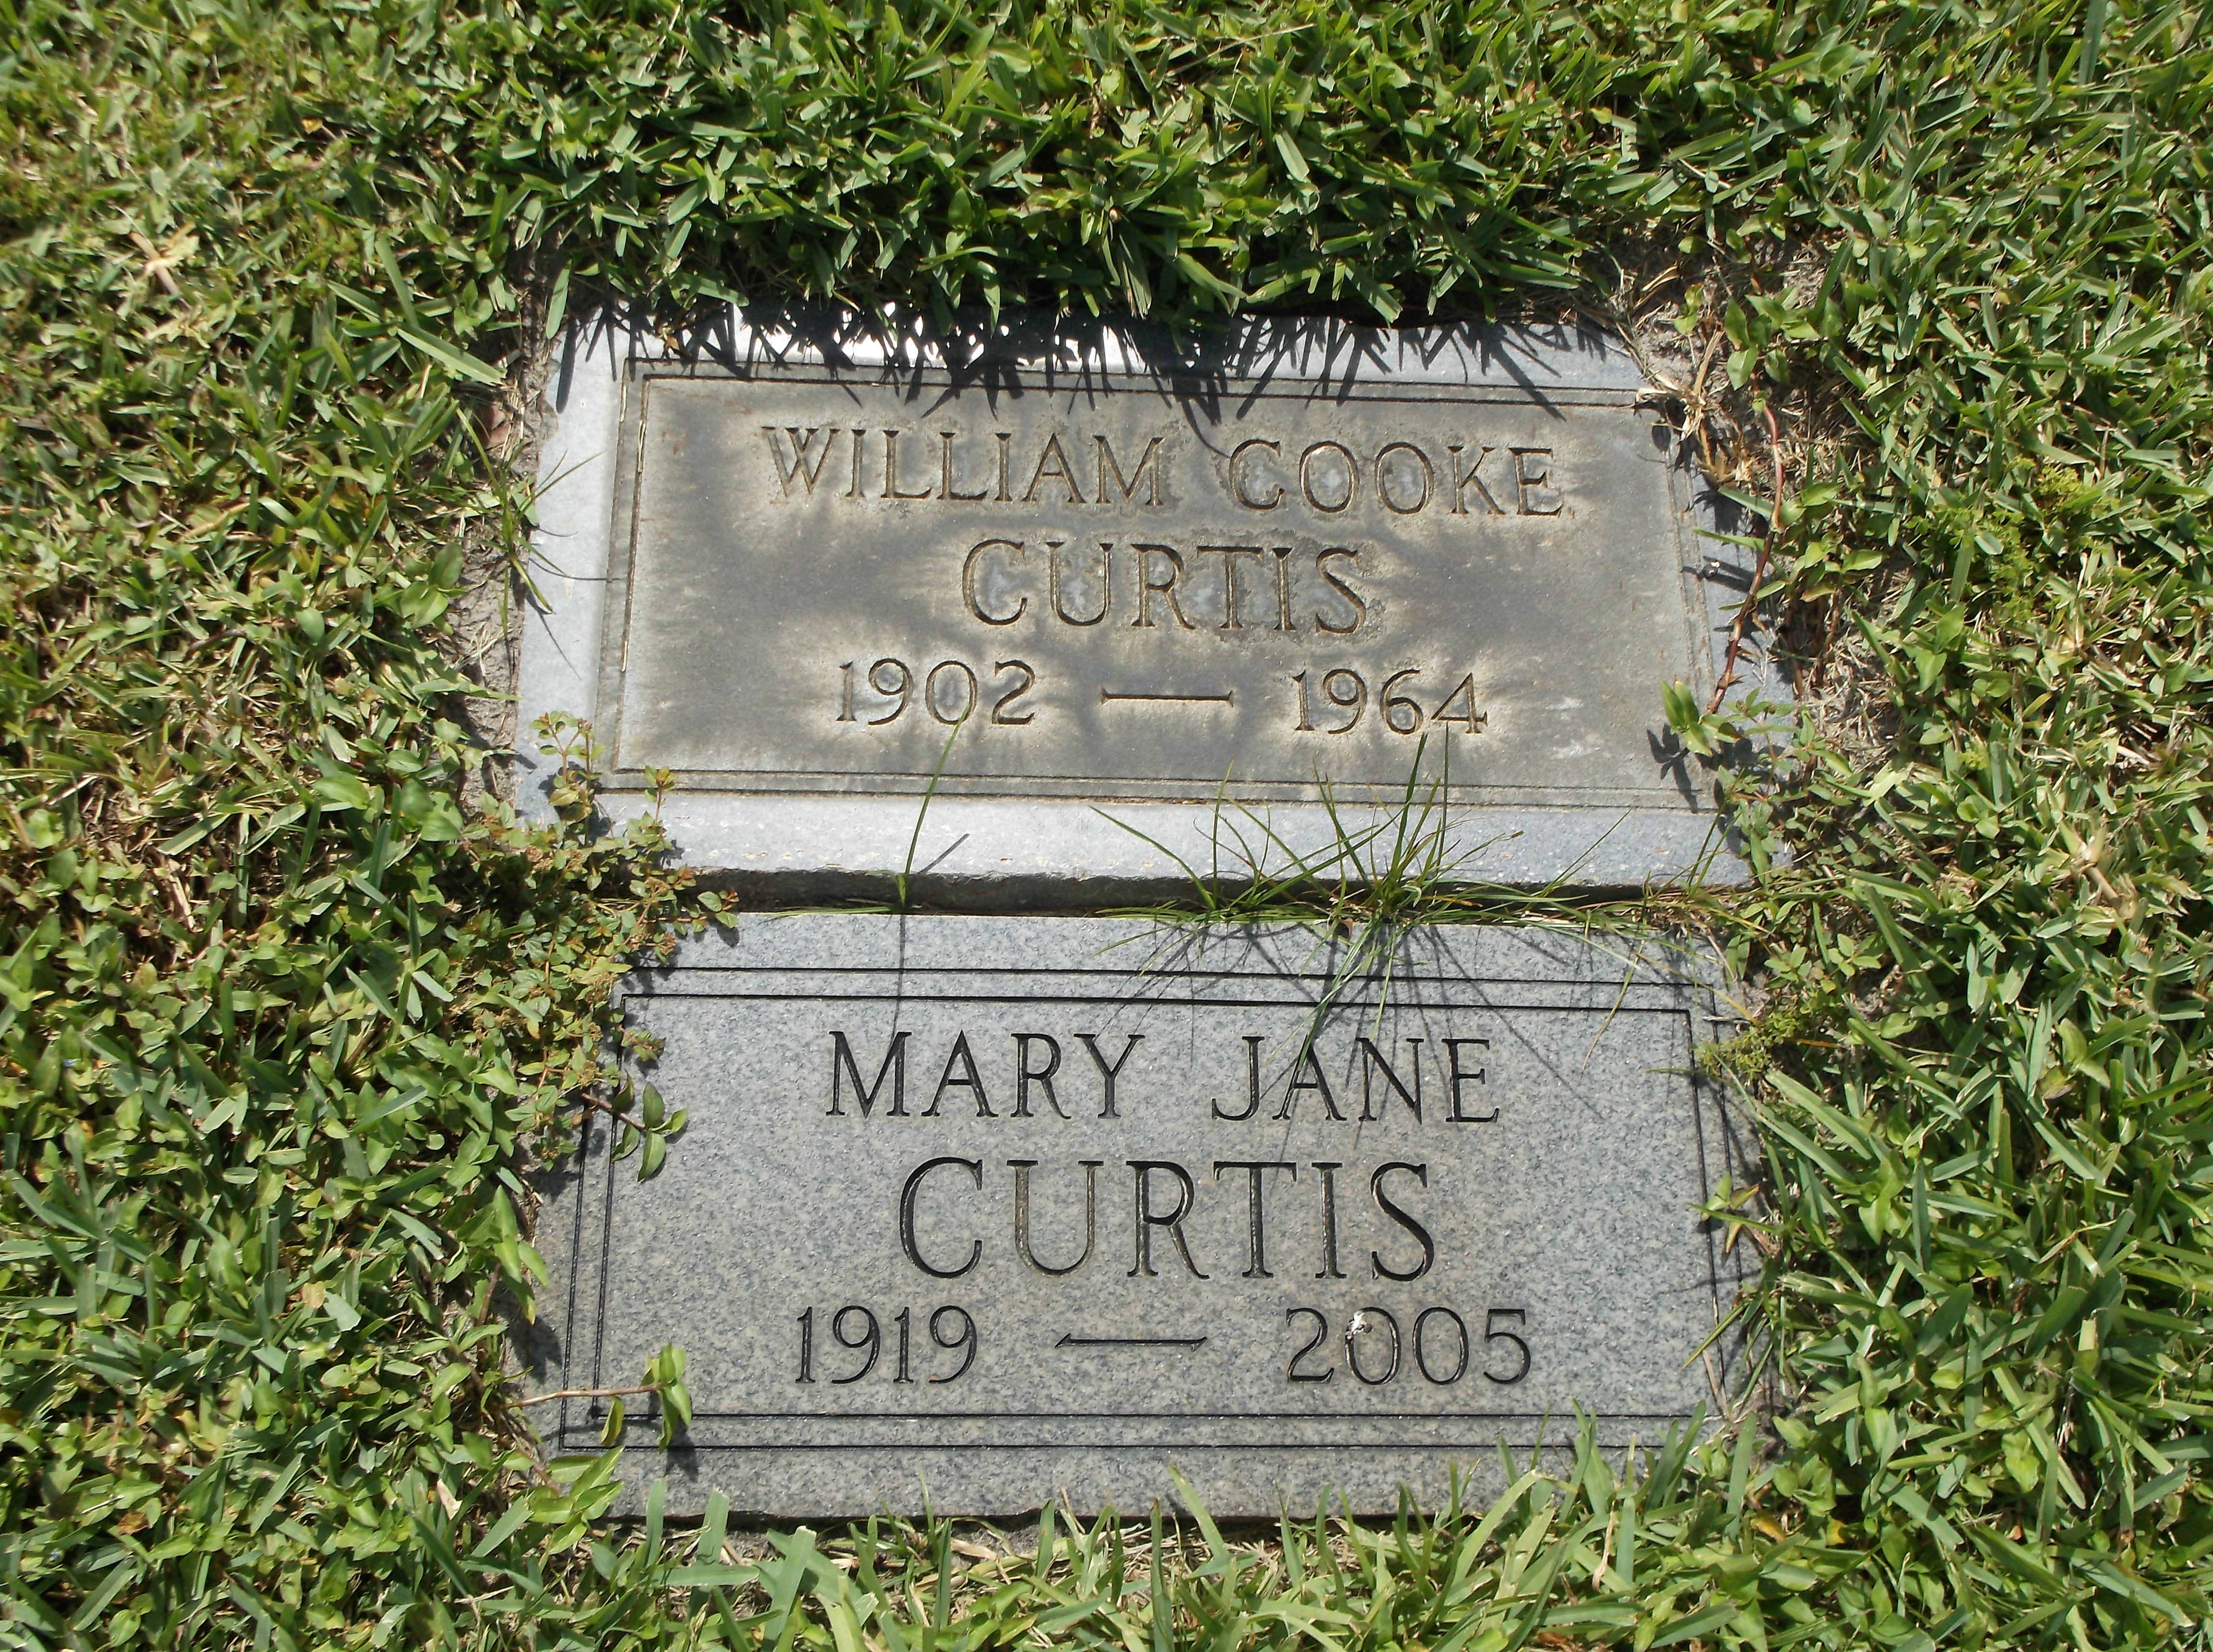 Mary Jane Curtis